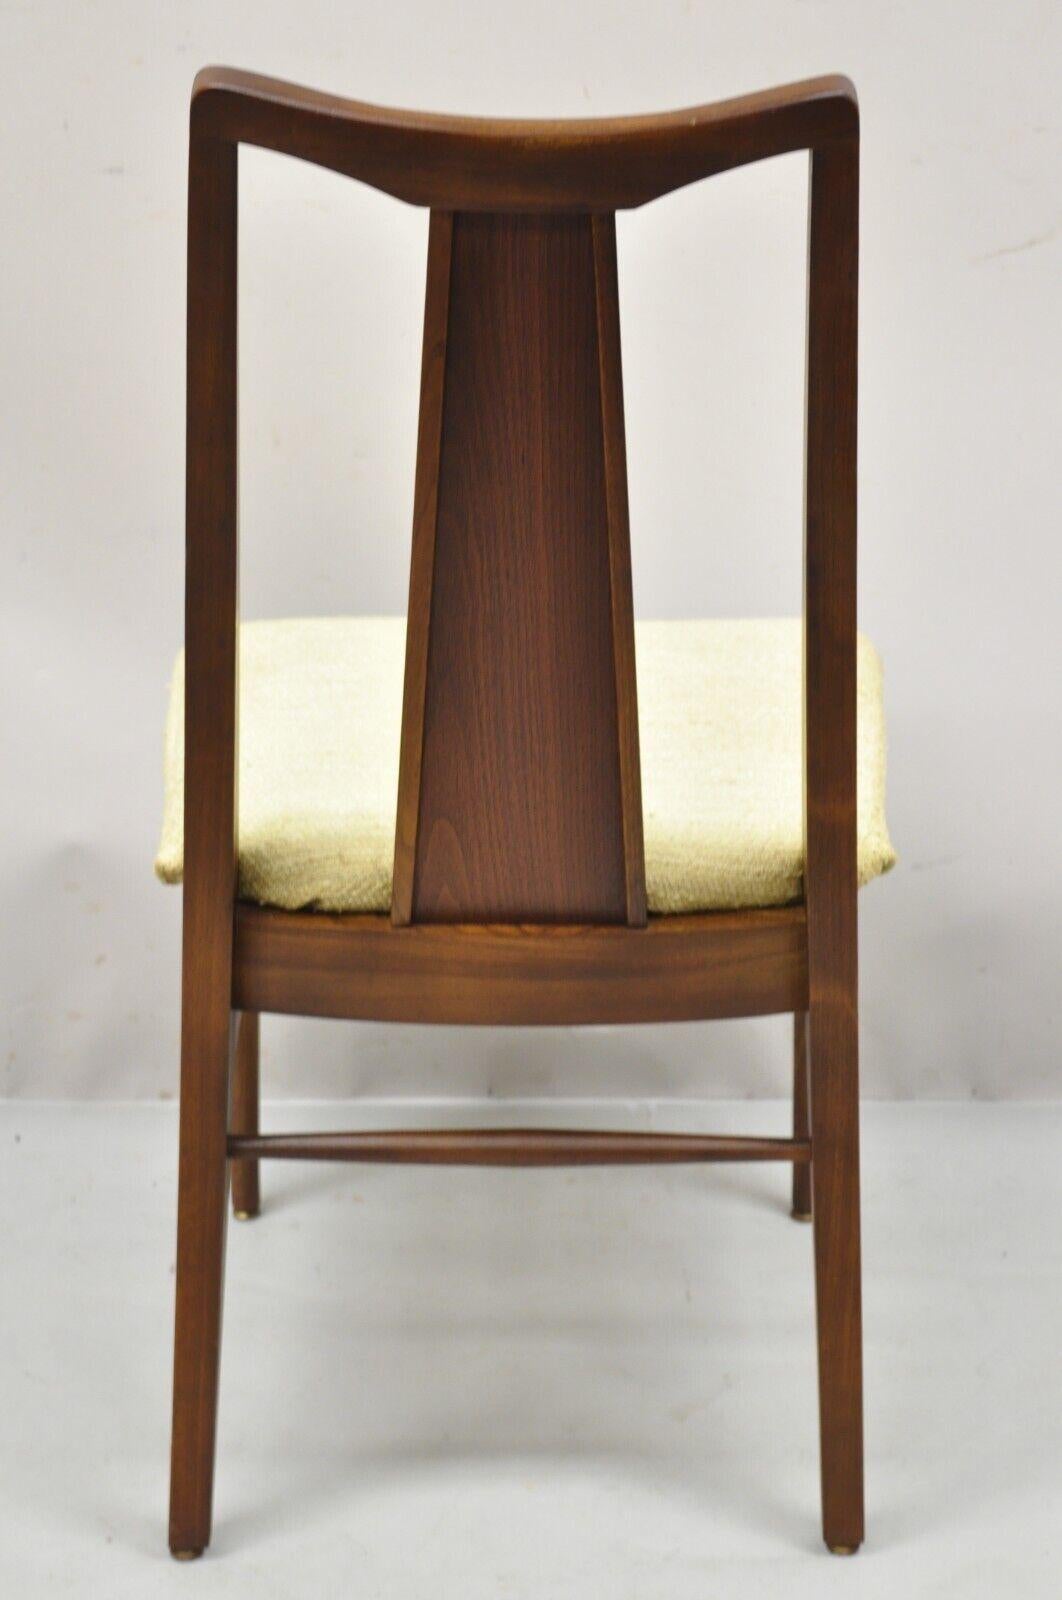 Vintage Mid-Century Modern Walnut Cane Back Dining Chairs, Set of 4 For Sale 1